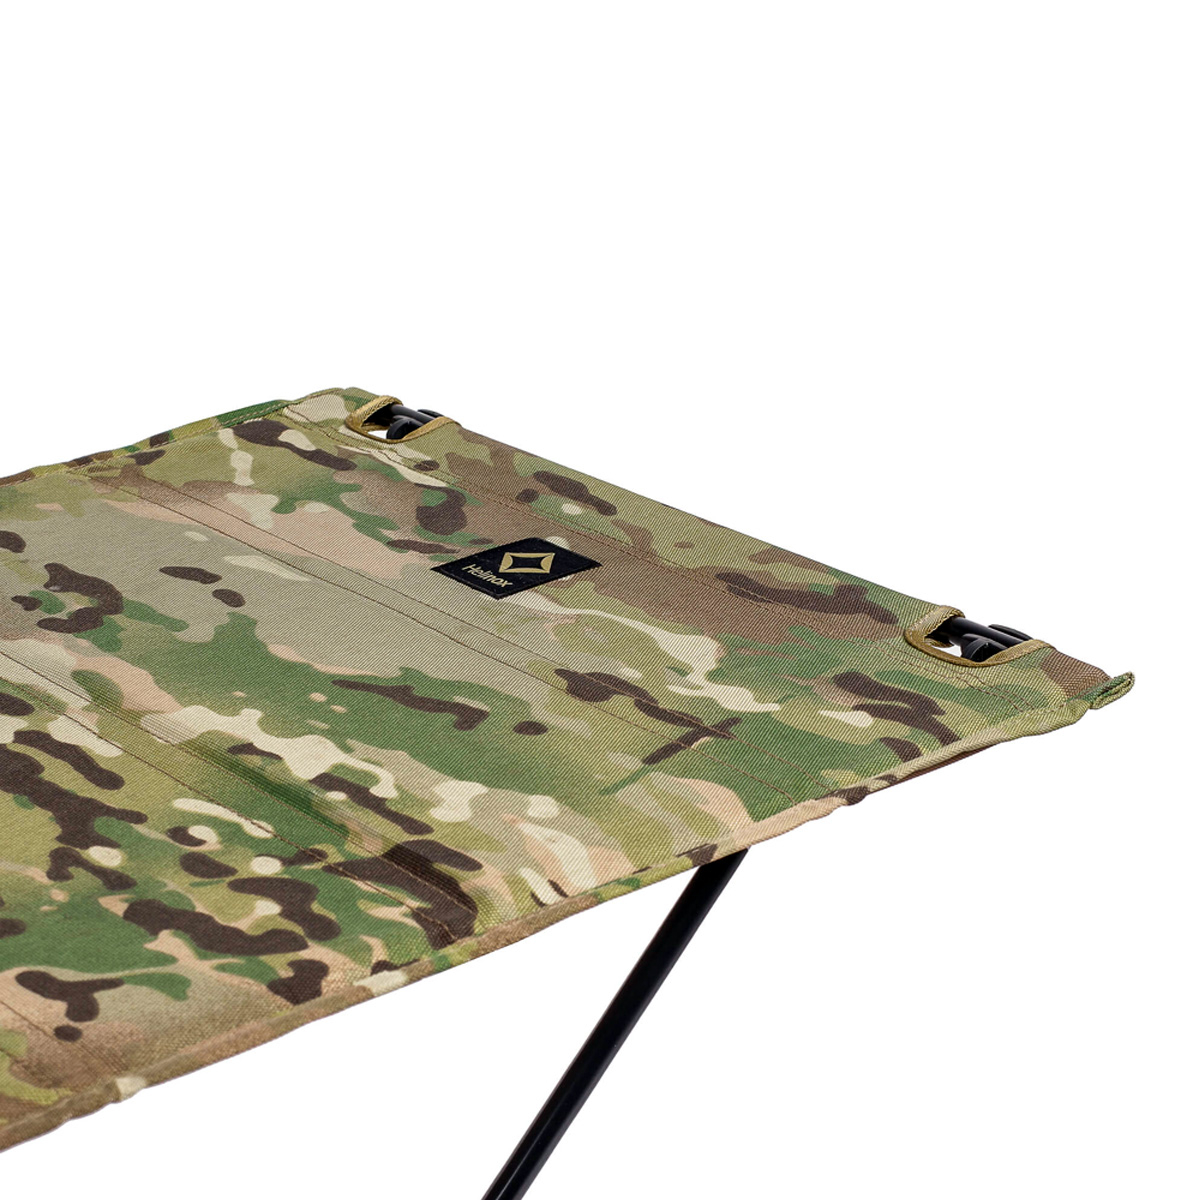 Helinox Tactical Tactical Table MultiCam fabric, bluesign®-certified und recycled 600D polyester